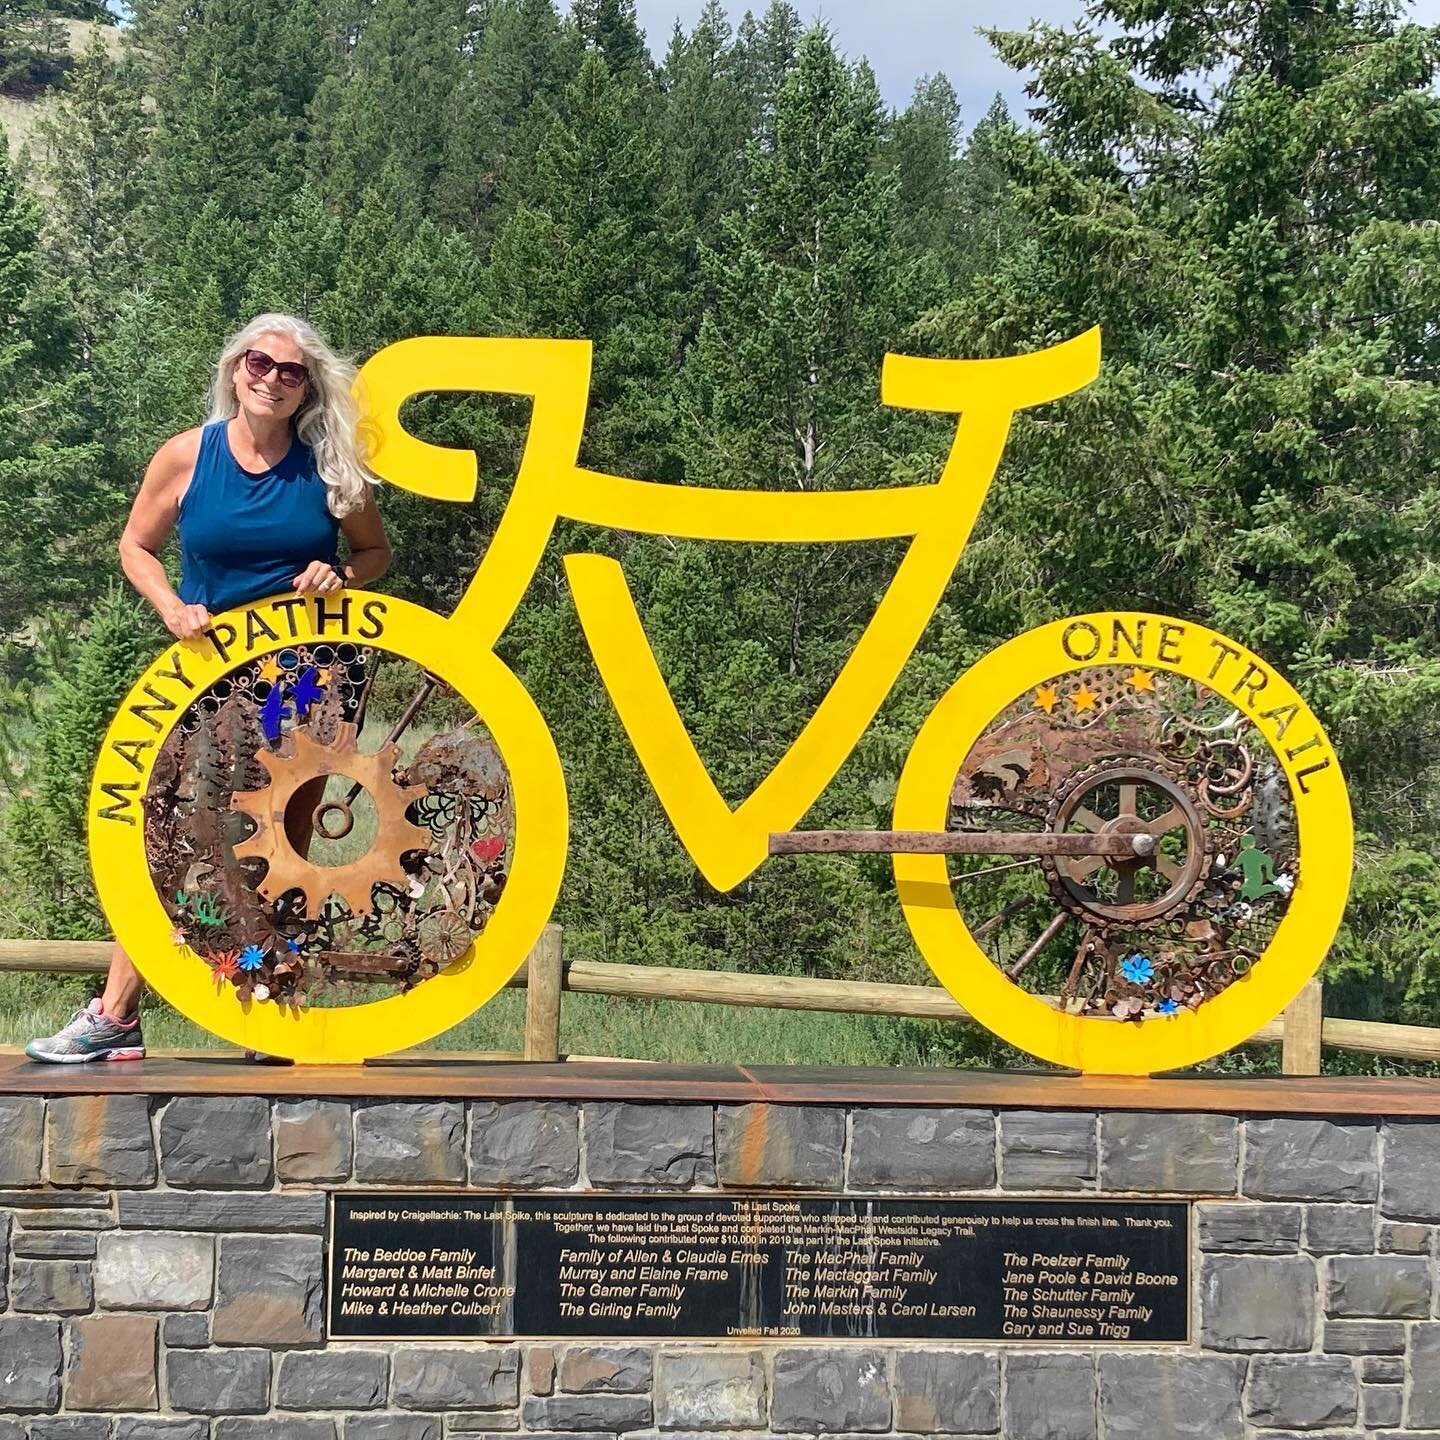 Yesterday was all work, today we play. 🚴
.
One of the many treasures of this little valley that is our home away from home is the #westsidelegacytrail.
.
A gorgeous, undulating paved pathway that runs alongside the west side of the lake between Inve